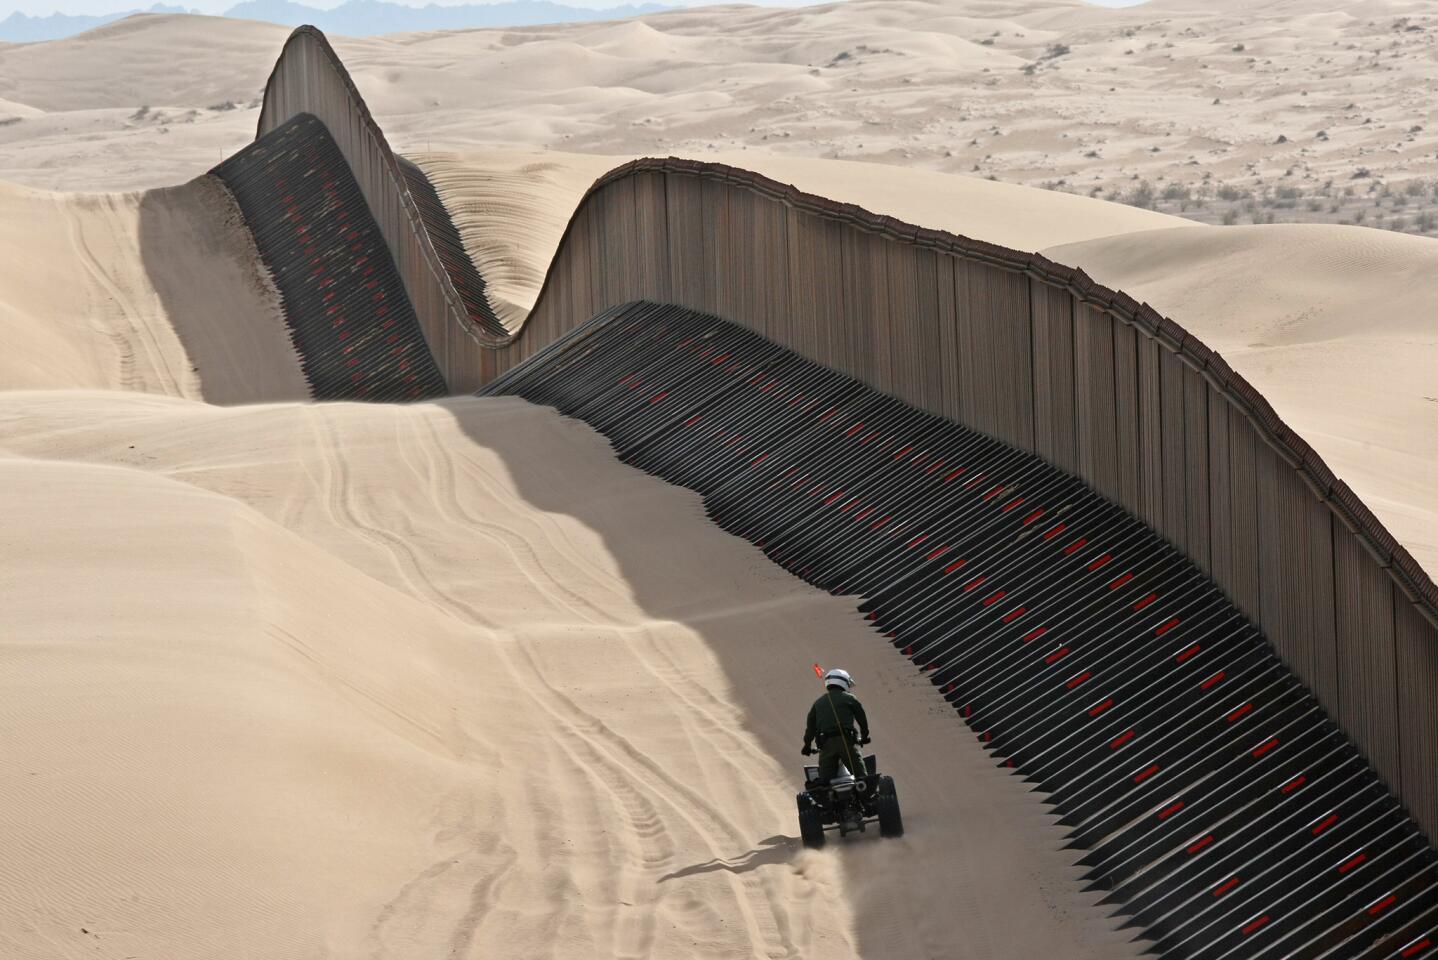 March 4, 2009: A U.S. Border Patrol agent inspects the "floating fence" that sits atop the powdery Imperial Sand Dunes in California. Angled buttresses on either side give the fence stability atop the wind-blown sand.